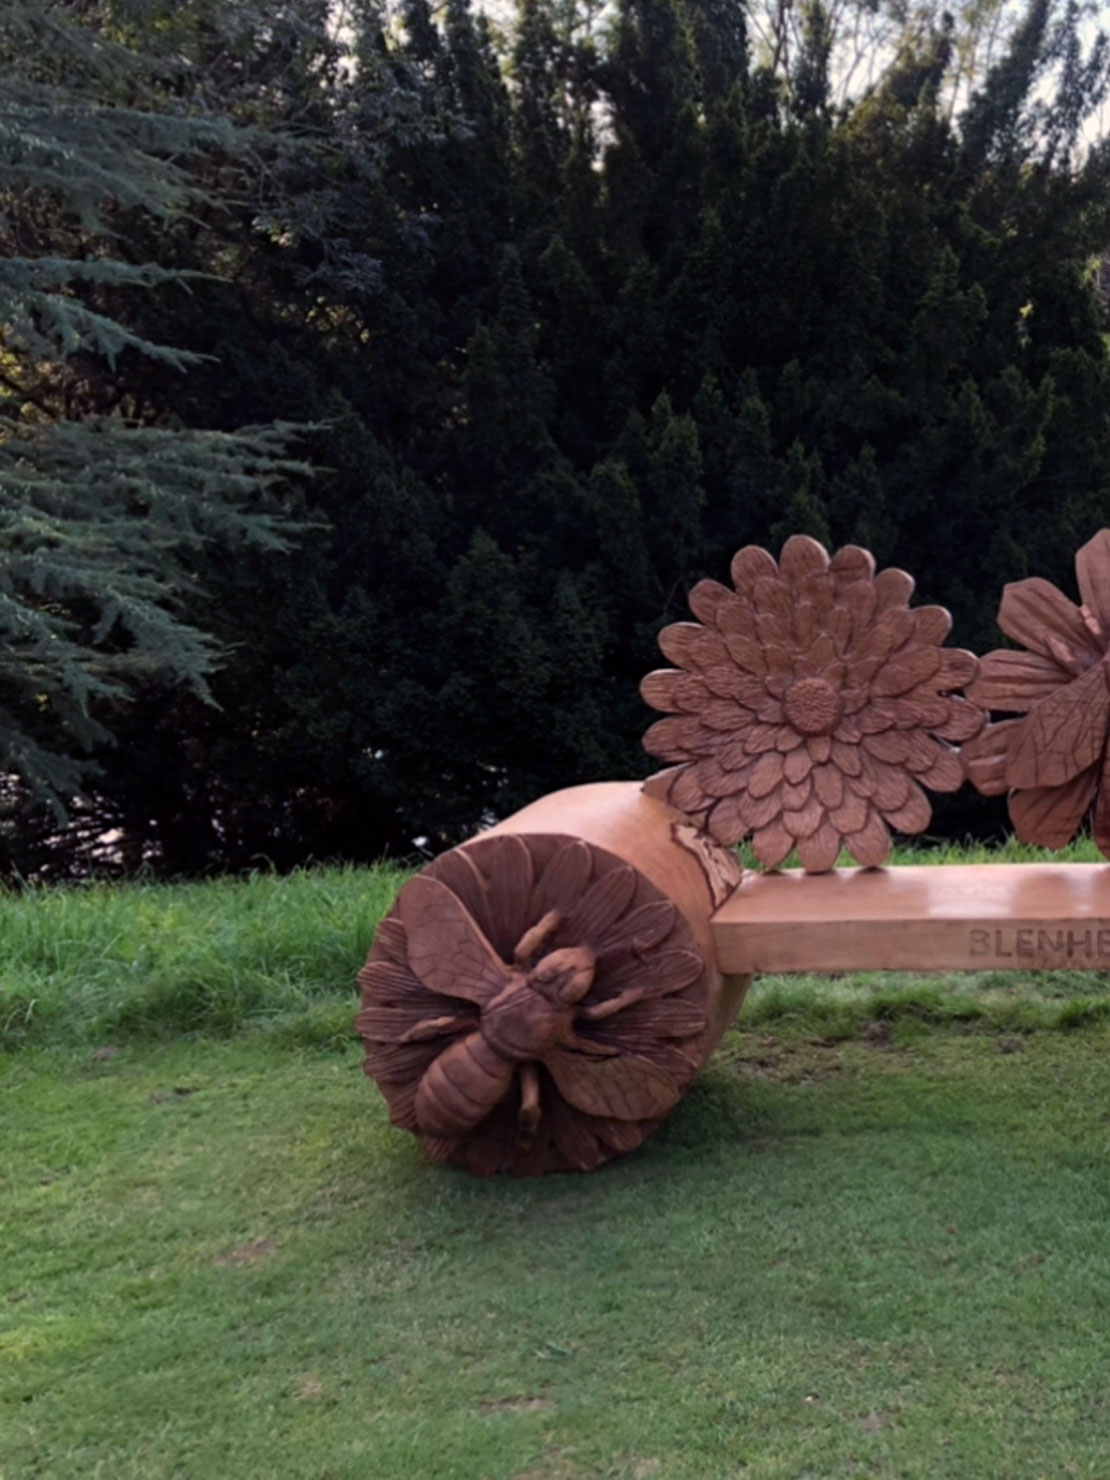 Bee bench at Blenheim Palace